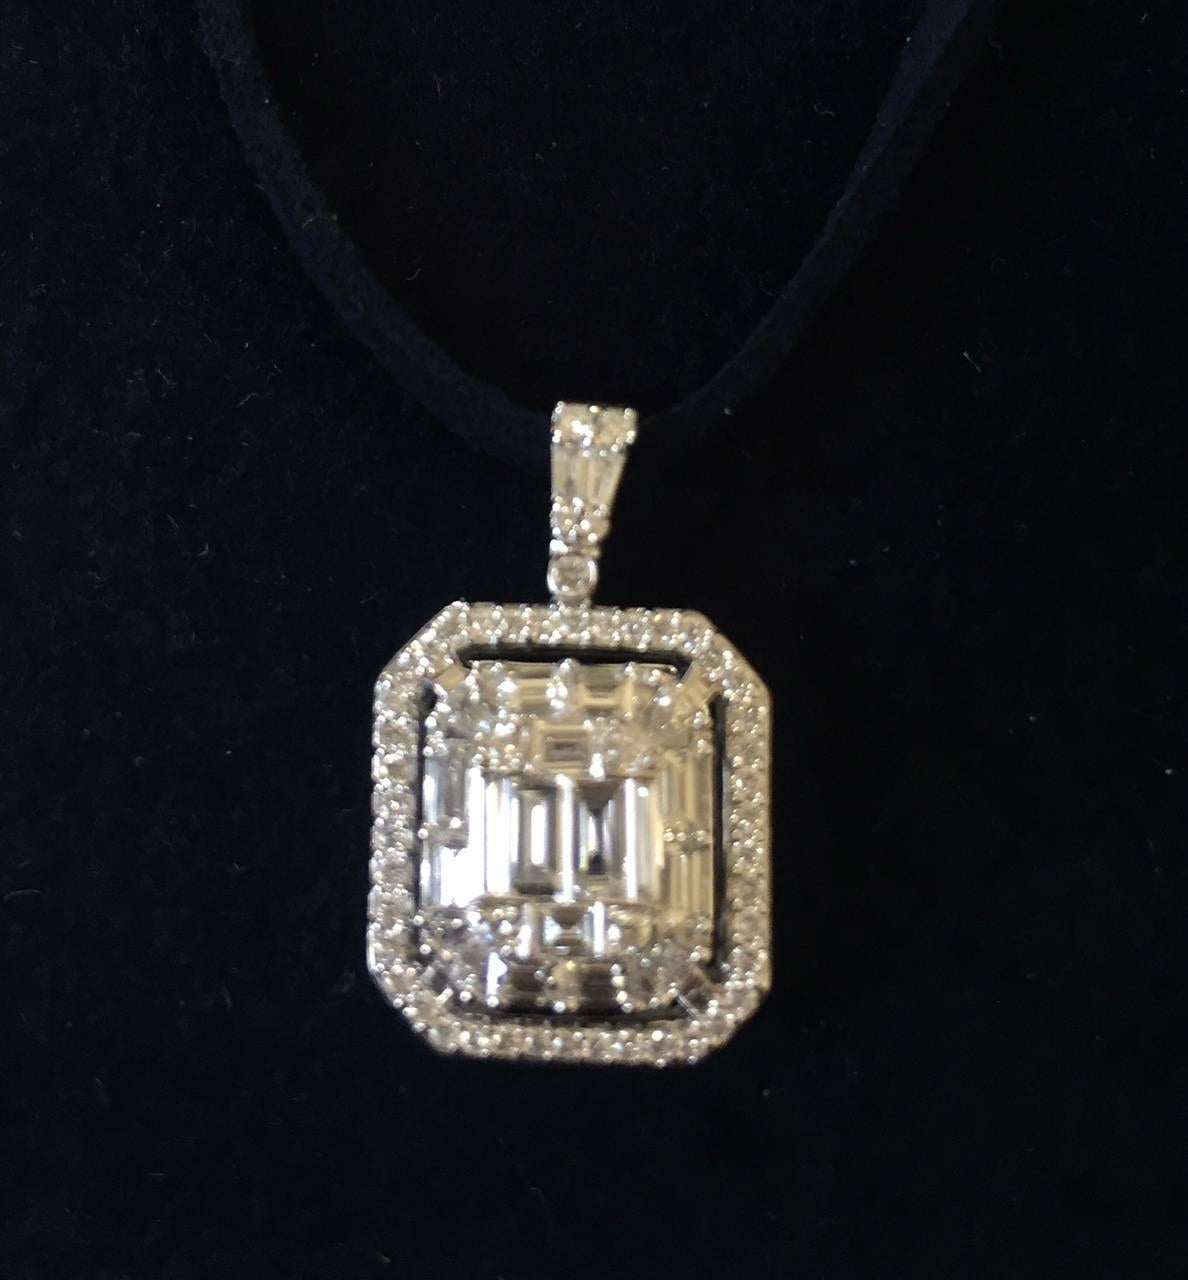 This pendant consists of a multi-cut stones that create the illusion of a big single stone. The total wt. of the pendant is 2.06ct. The color is G and the clarity VS1. This stunning piece is pure elegance.

All our pieces come with an appraisal